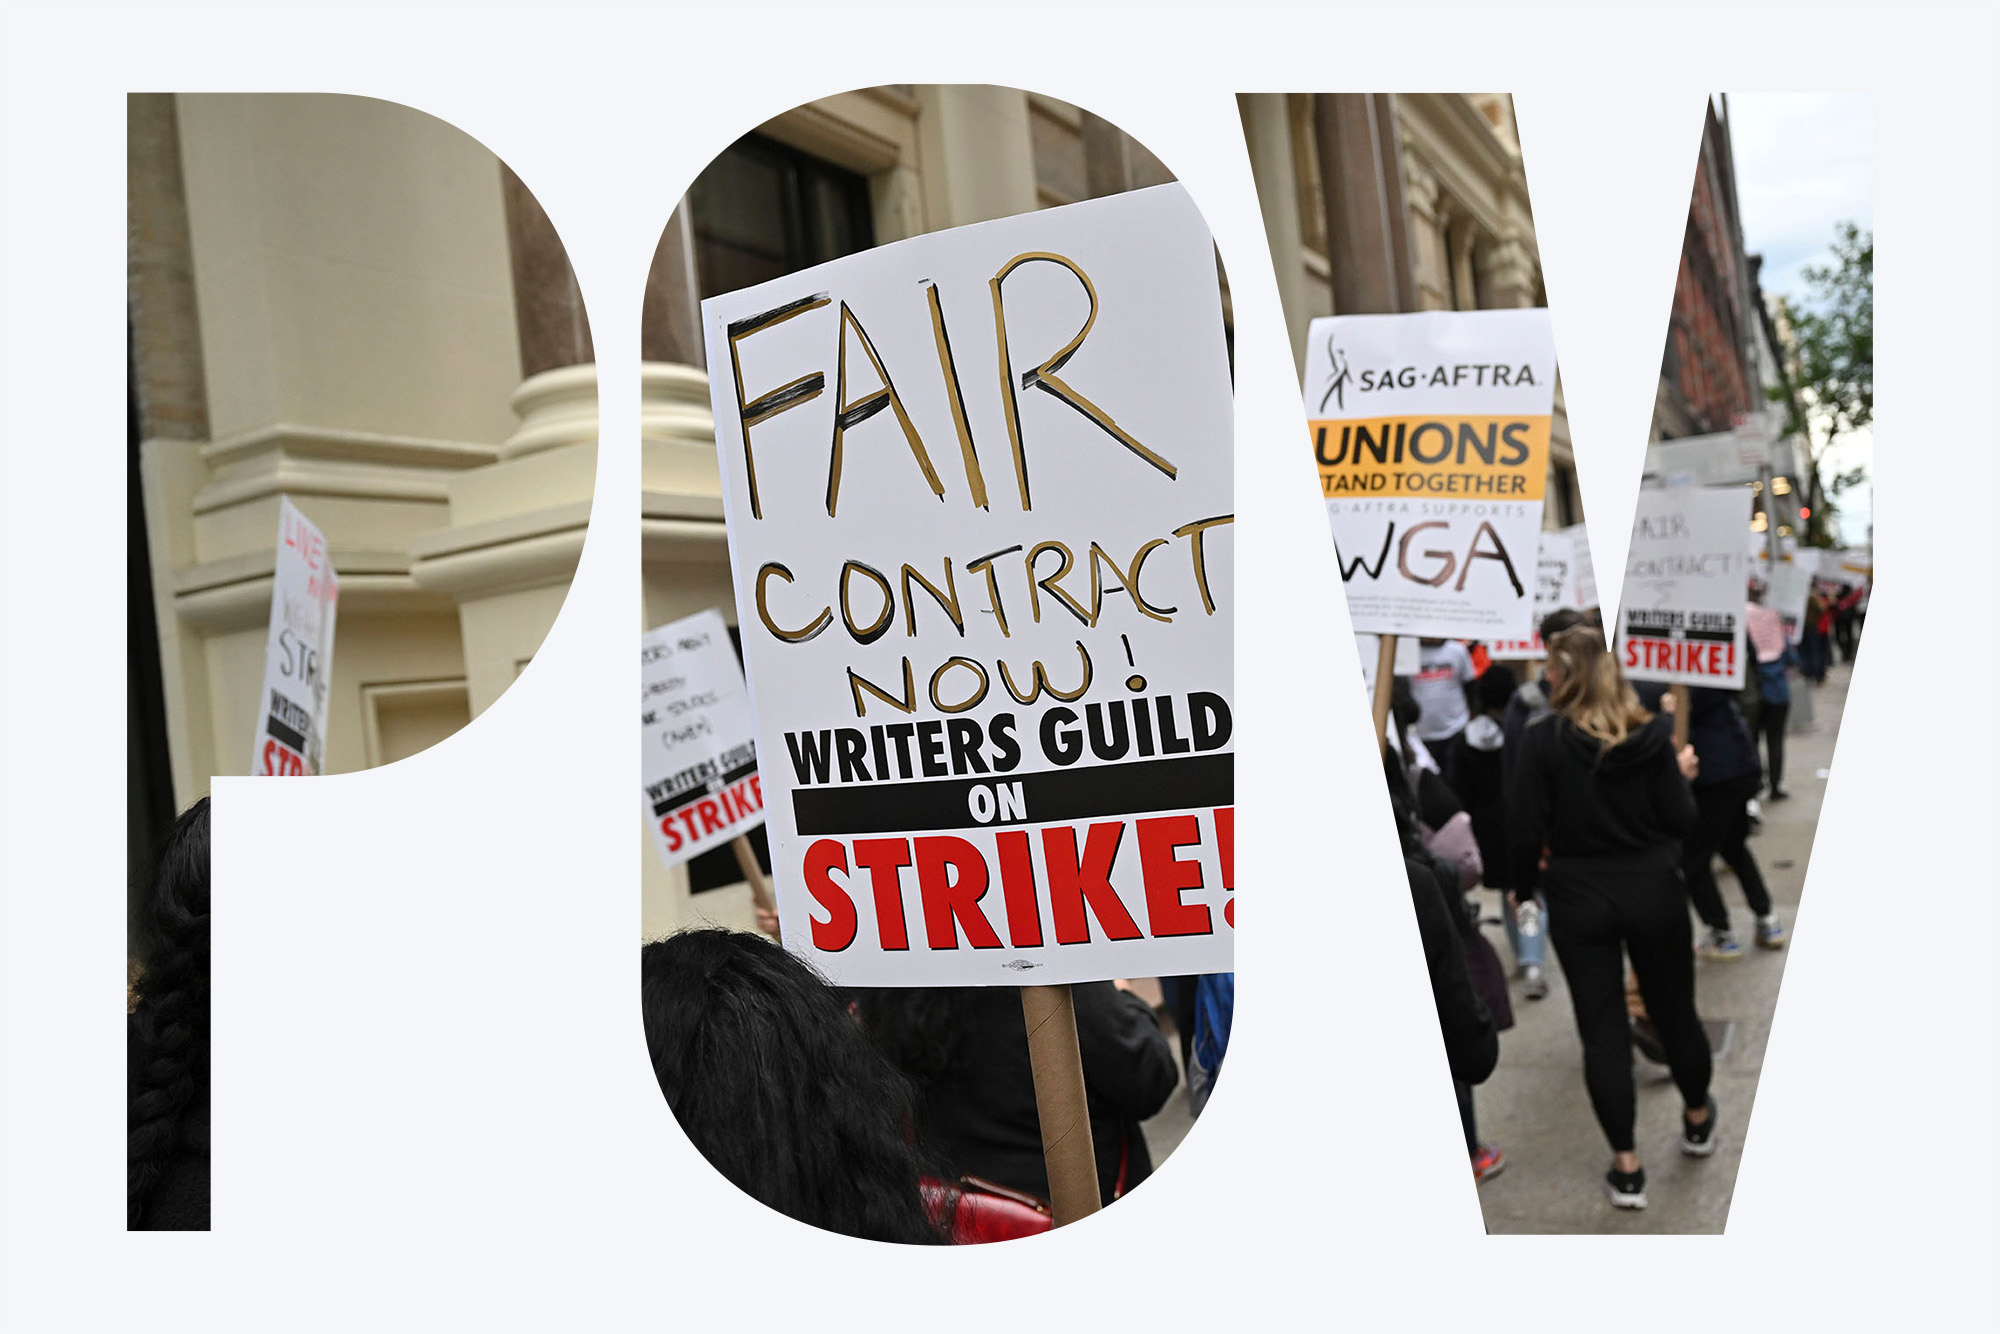 Photo: A group of strikers hold up signs protesting the unfair decisions and contracts made for writers in the writer guild. The prompt sign in the middle of the photo reads: "FAIR CONTRACT NOW! WRITERS GUILD ON STRIKE". The photo has a POV overlay on it.